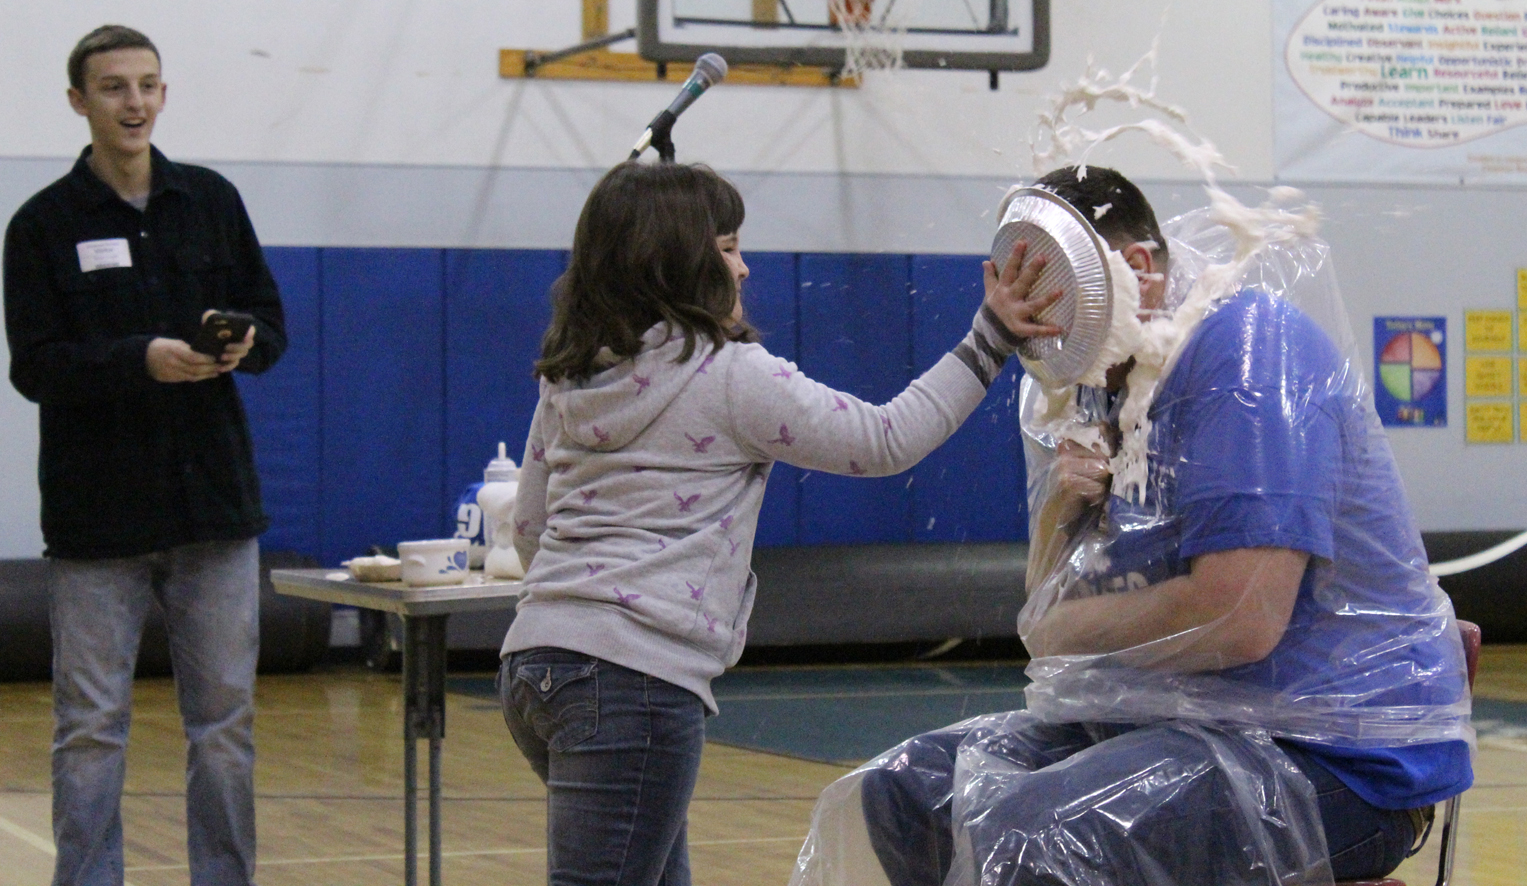 Harley Boon, a Chapman School fourth grader, plants a pie directly in the face of Principal Conrad Woodhead. Harley was drawn as the pie-thrower to represent her class, which raised the most money in the Bethel School fundraiser.-Photo by Anna Frost, Homer News